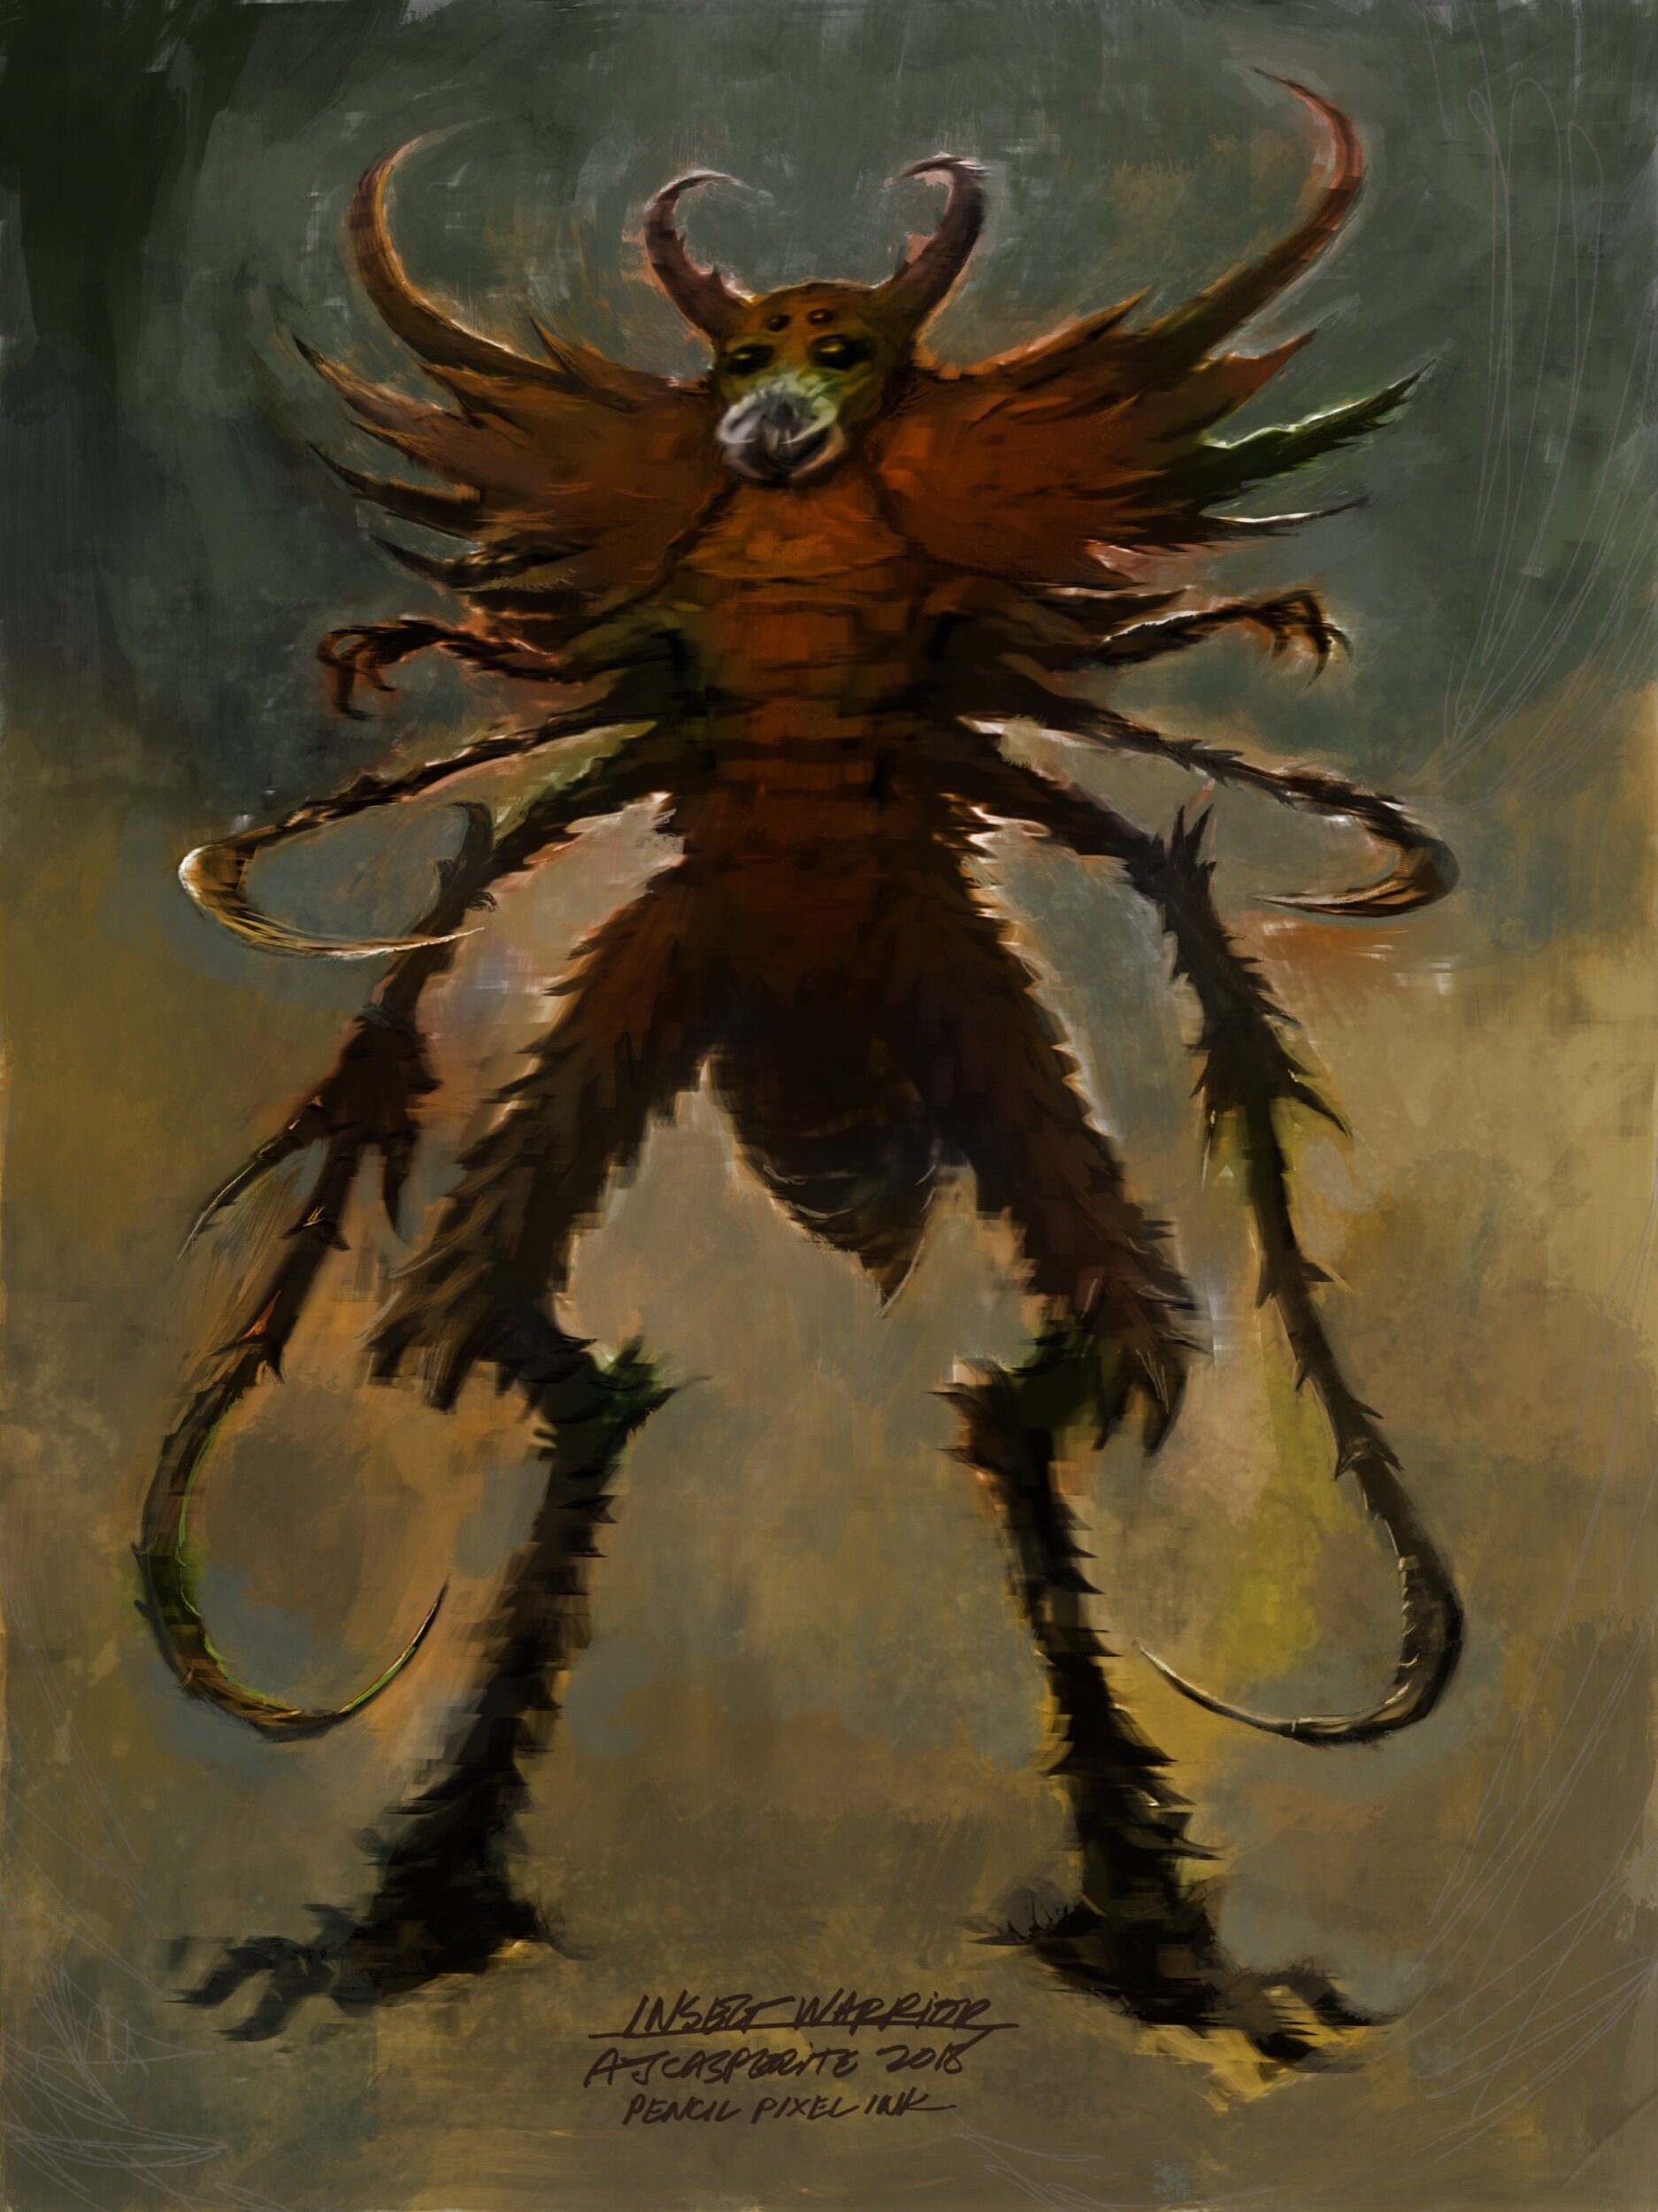 Insect warrior concept